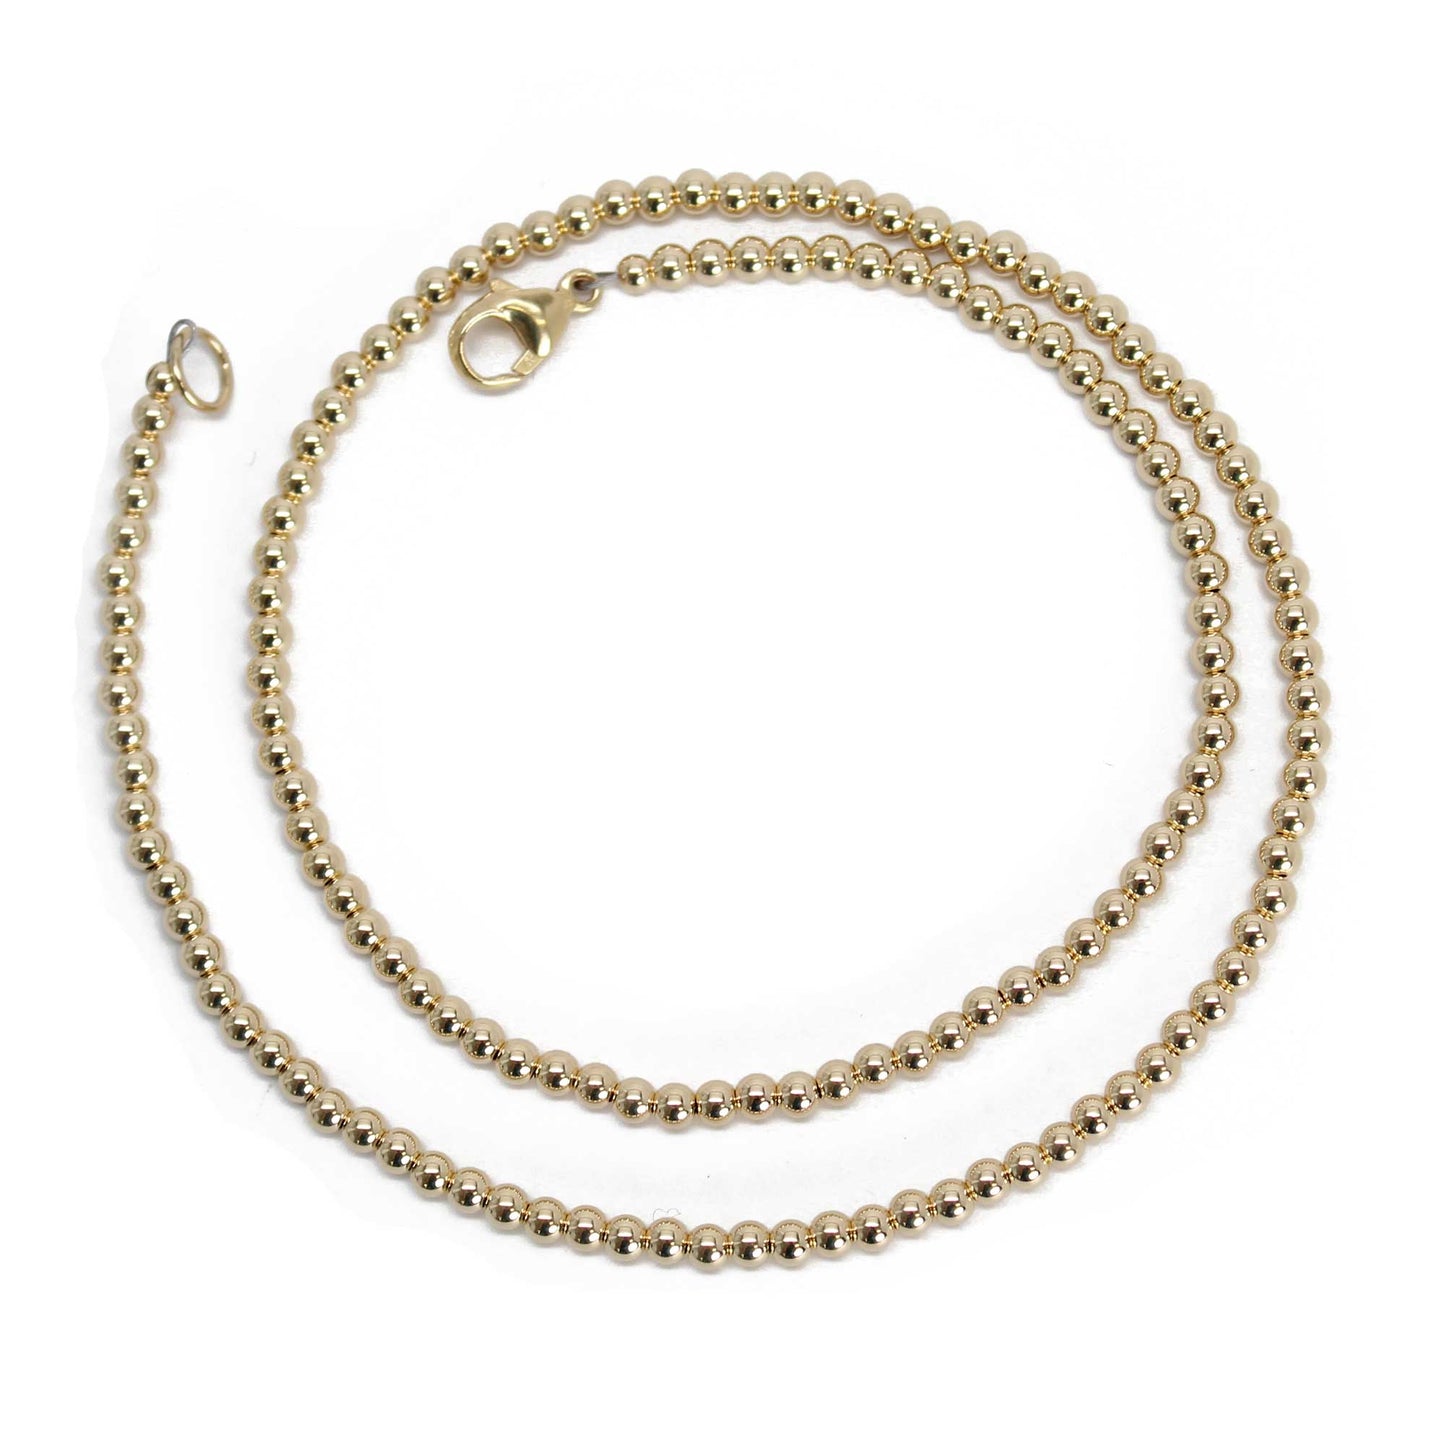 3mm Gold Filled Bead Necklace